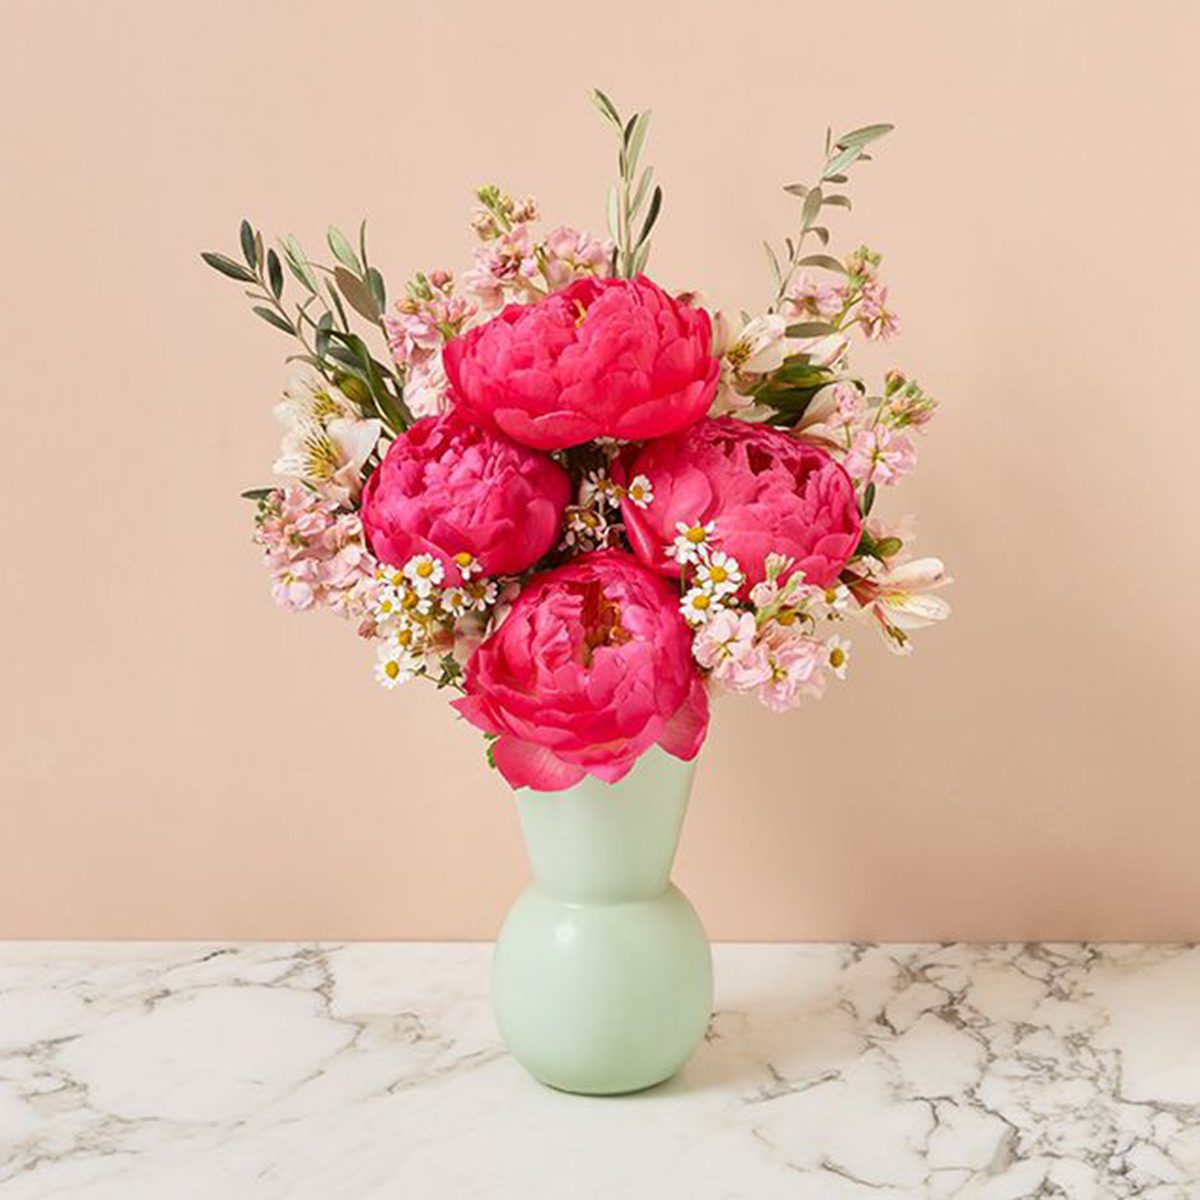 21 Mother's Day Flowers That Will Knock Her Socks Off